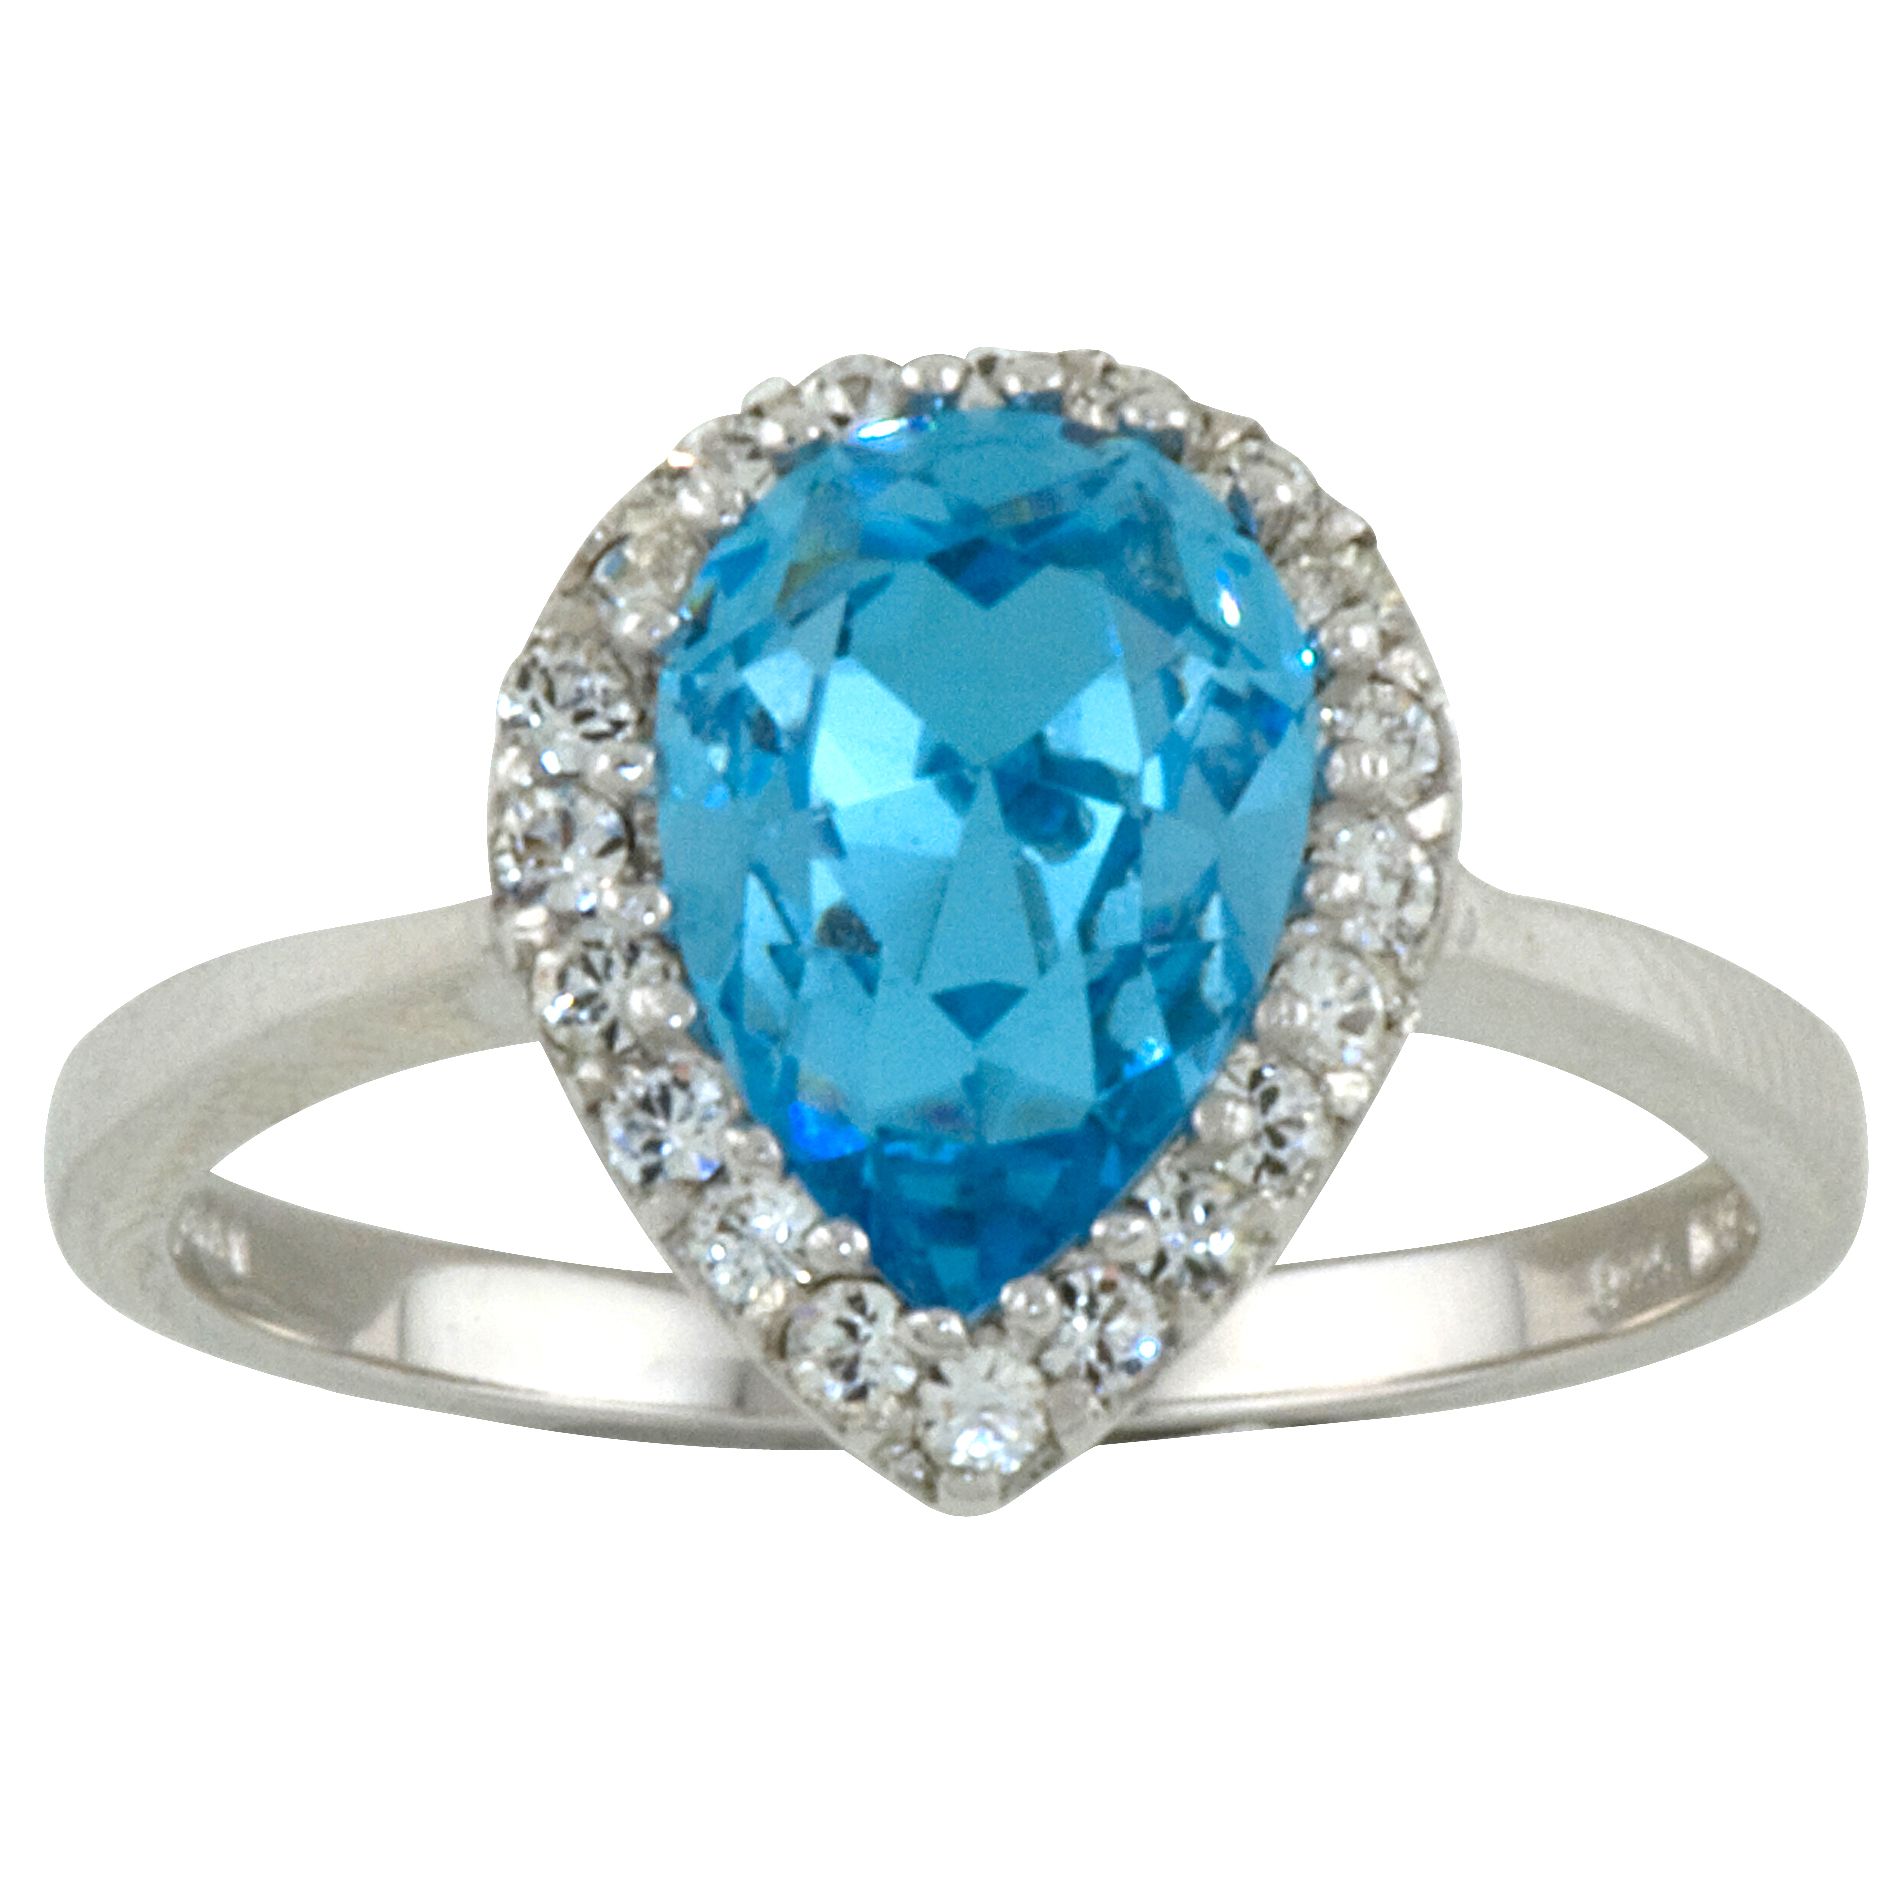 Aquamarine Pear-shaped Swarovski Crystal Ring in Rhodium over SS_in Size 8